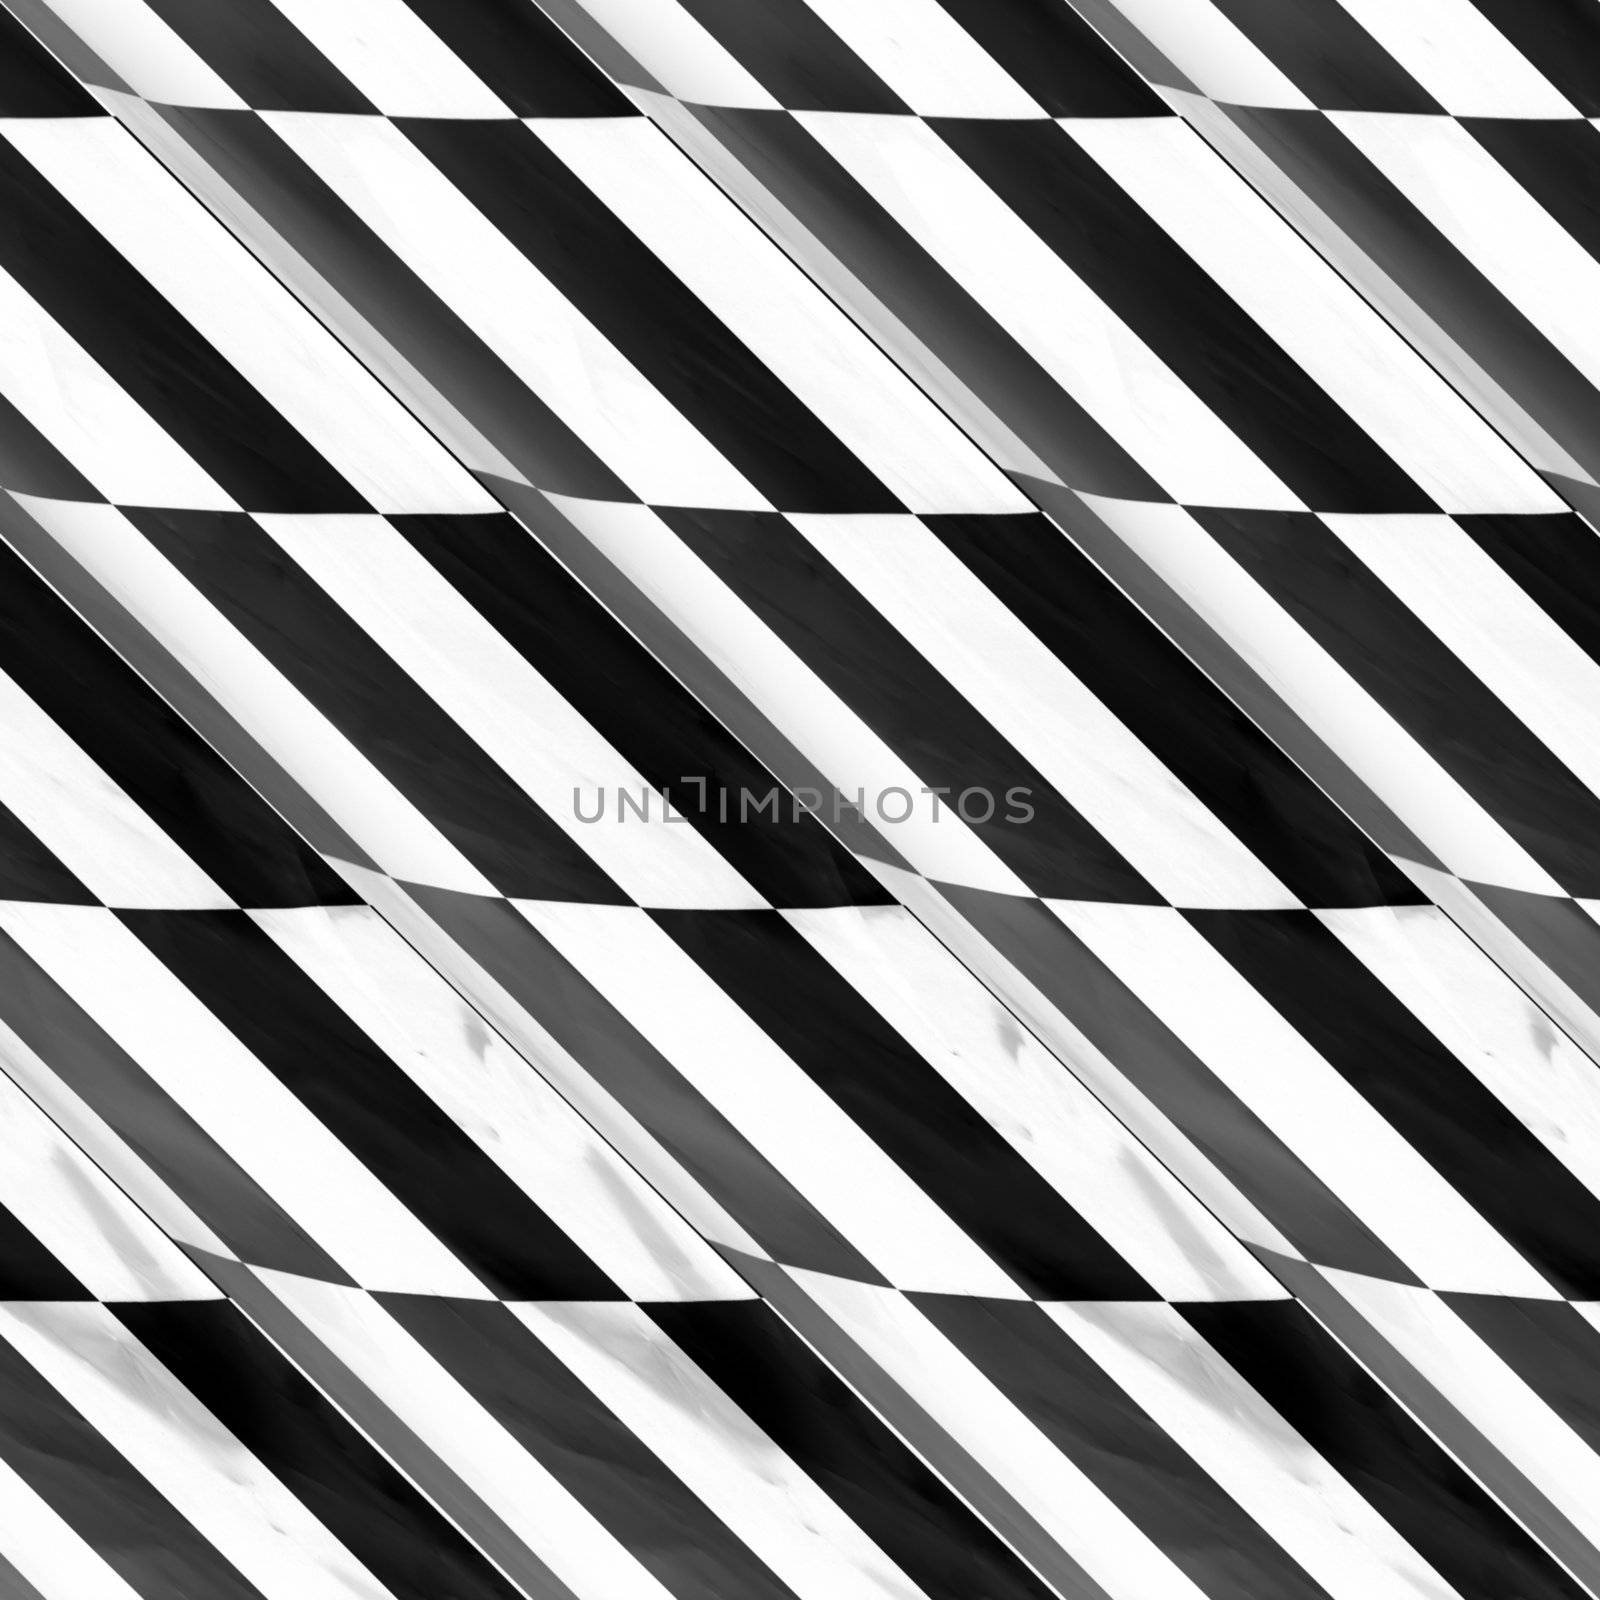 An abstract black and white geometric pattern with rectangular shaped boxes.